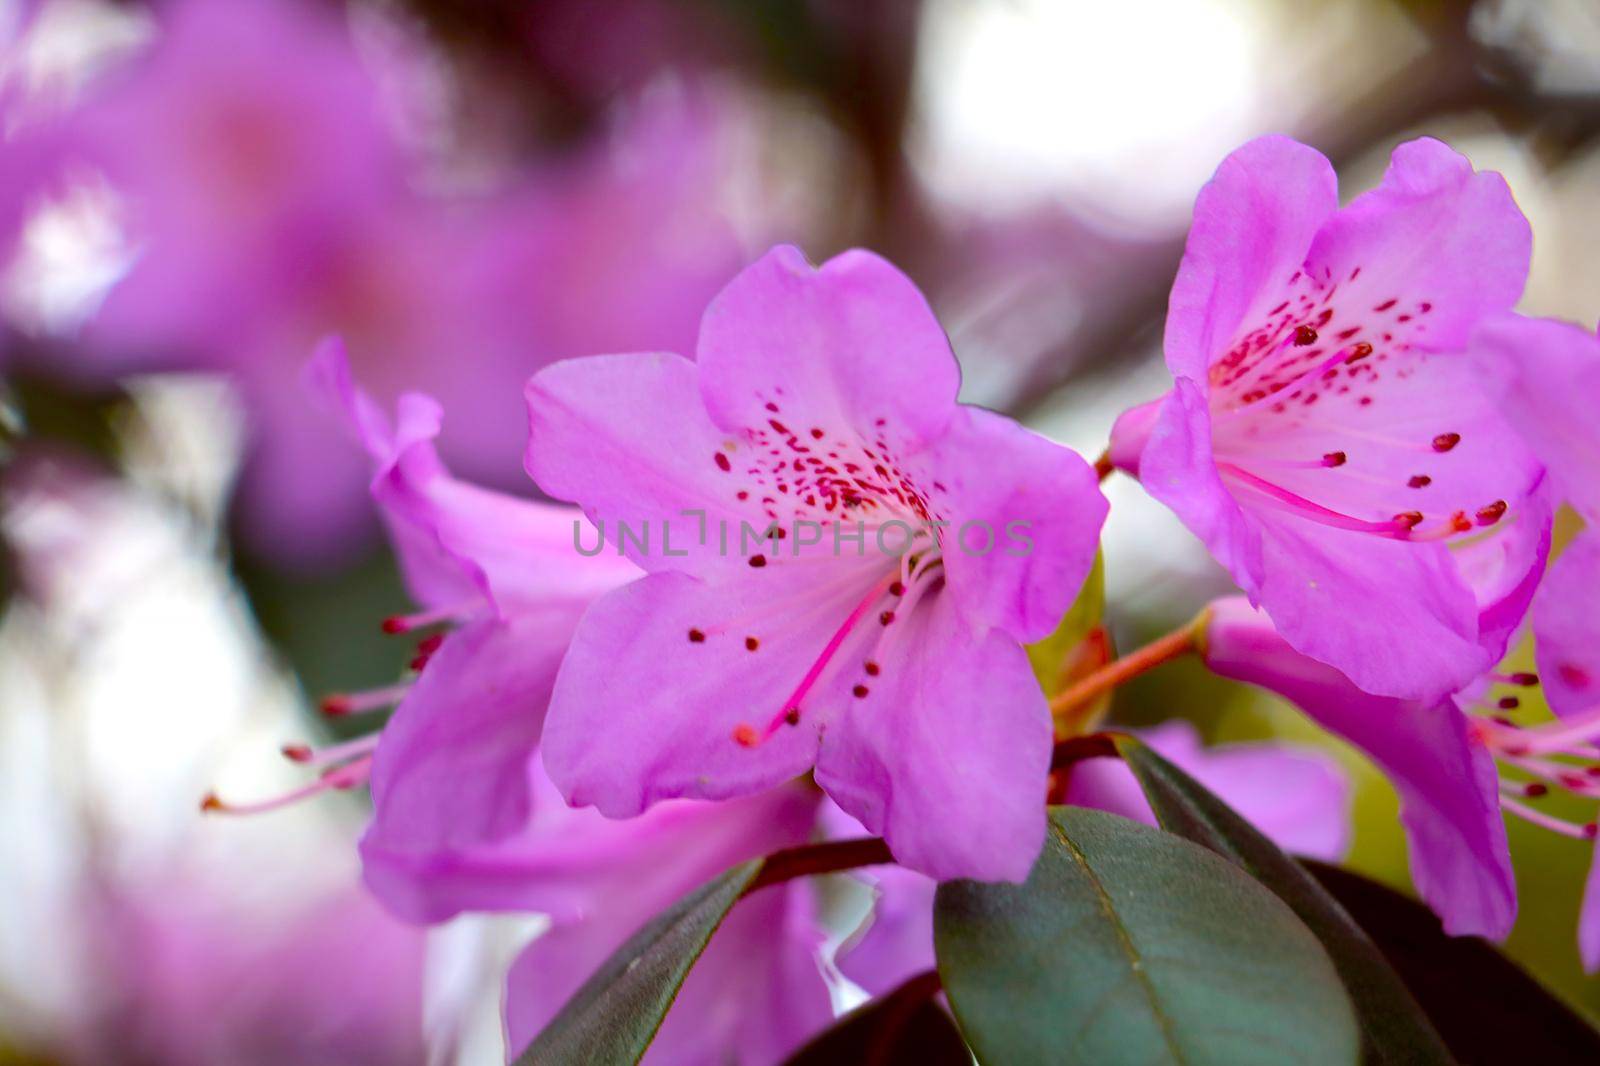 A flowering branch of rhododendron in the park in the spring